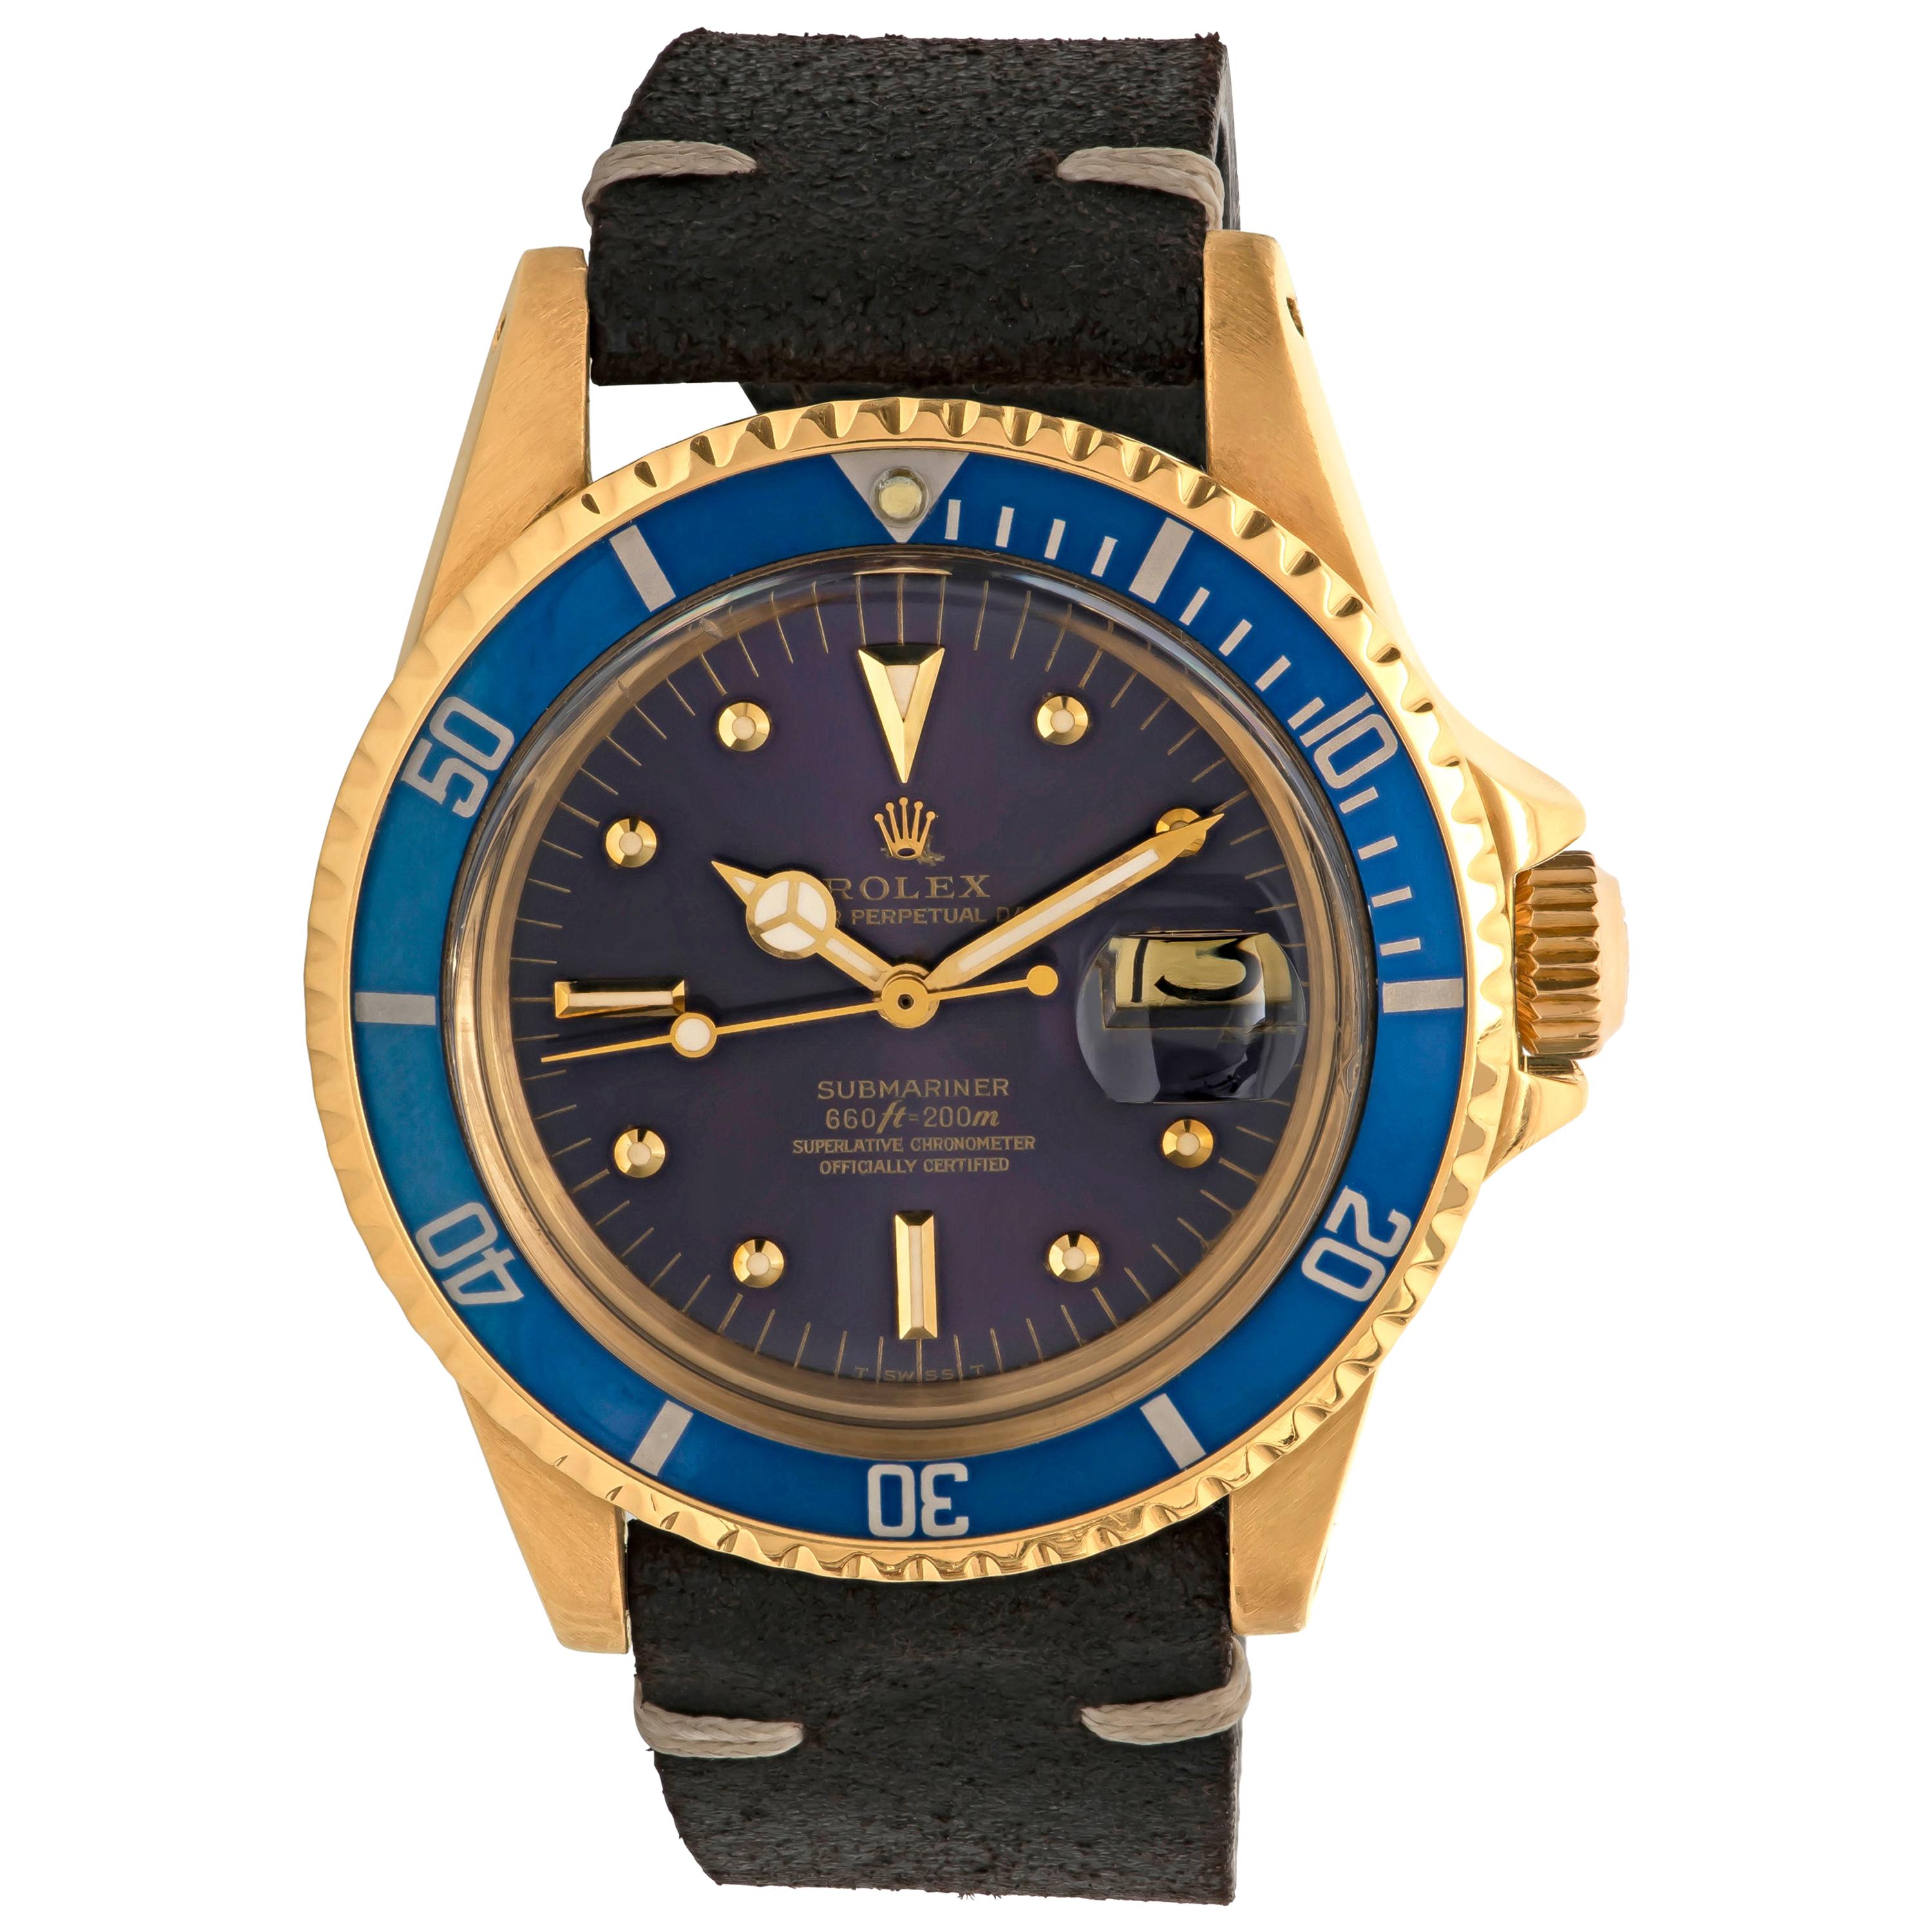 Rolex Submariner Yellow Gold Blue Nipple Dial Model 1680, circa 1978 For Sale